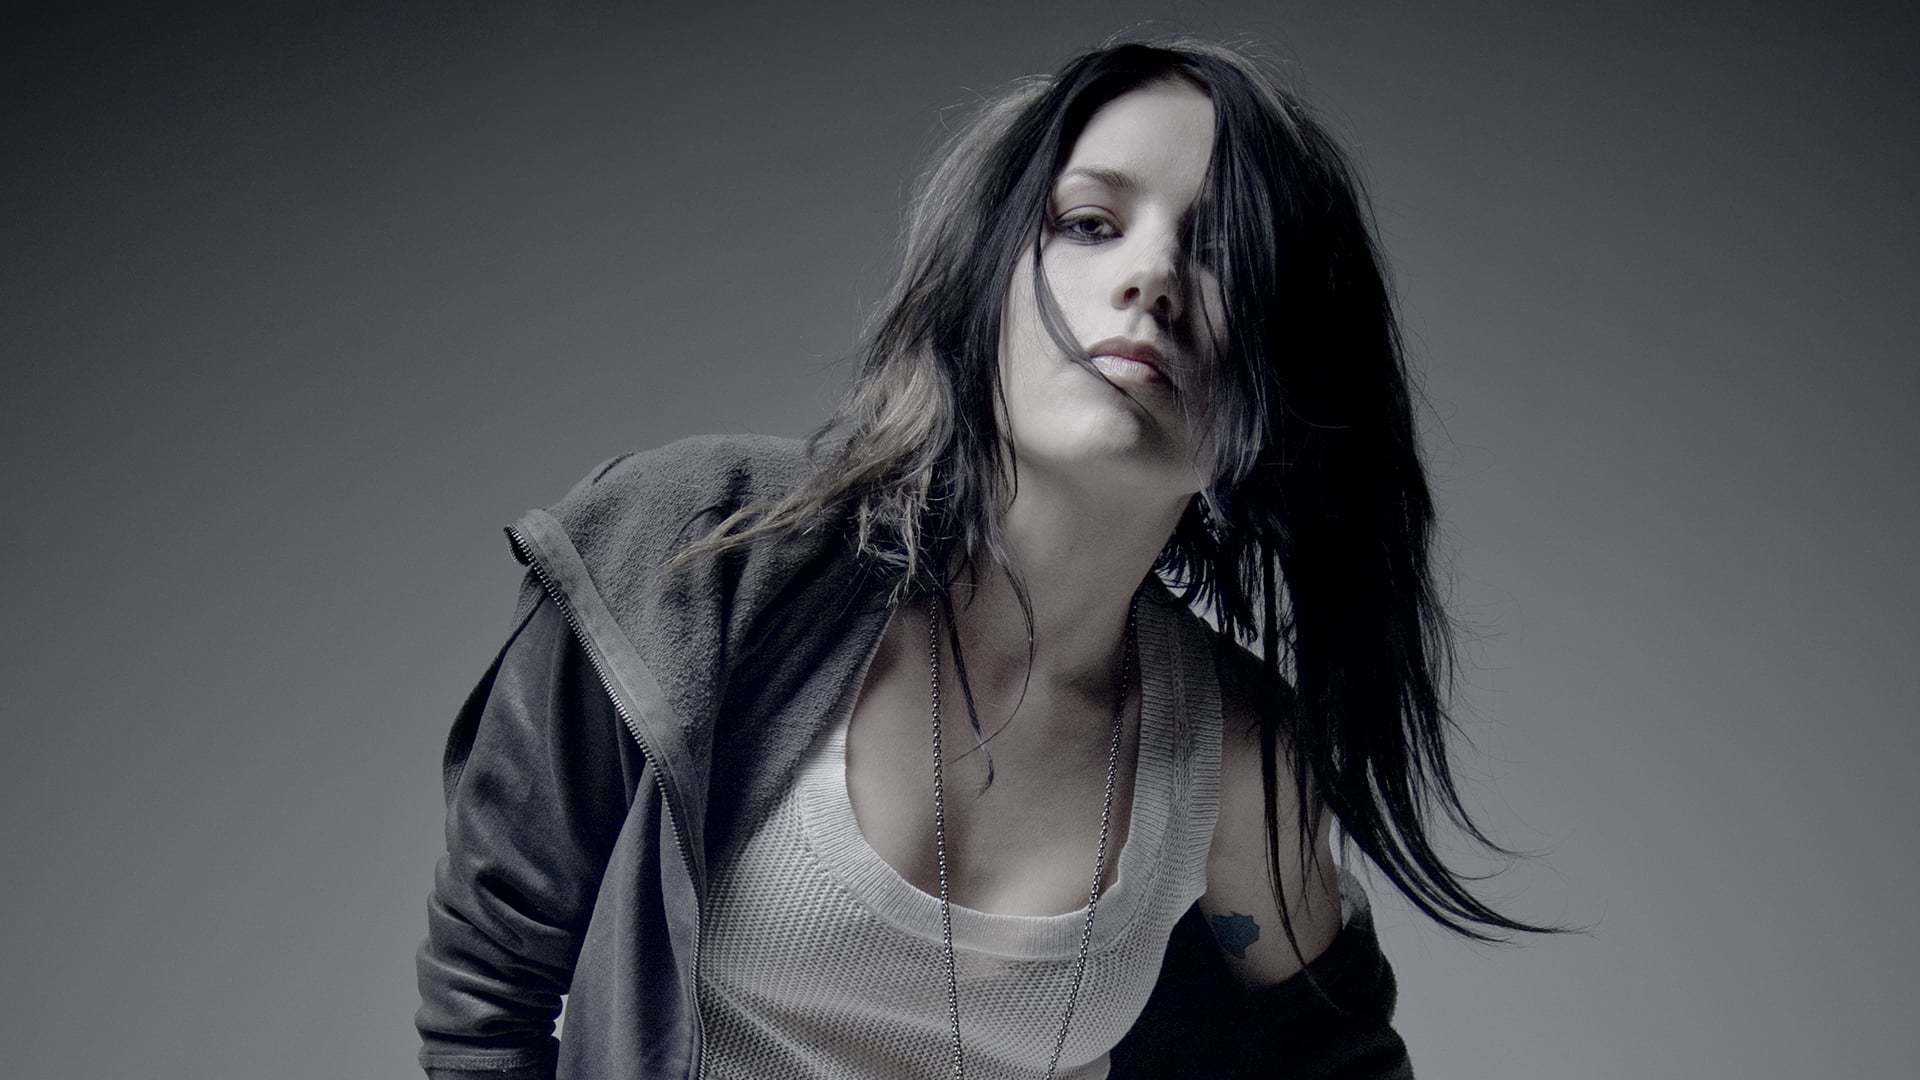 Skylar Grey Wallpapers Images Photos Pictures Backgrounds.